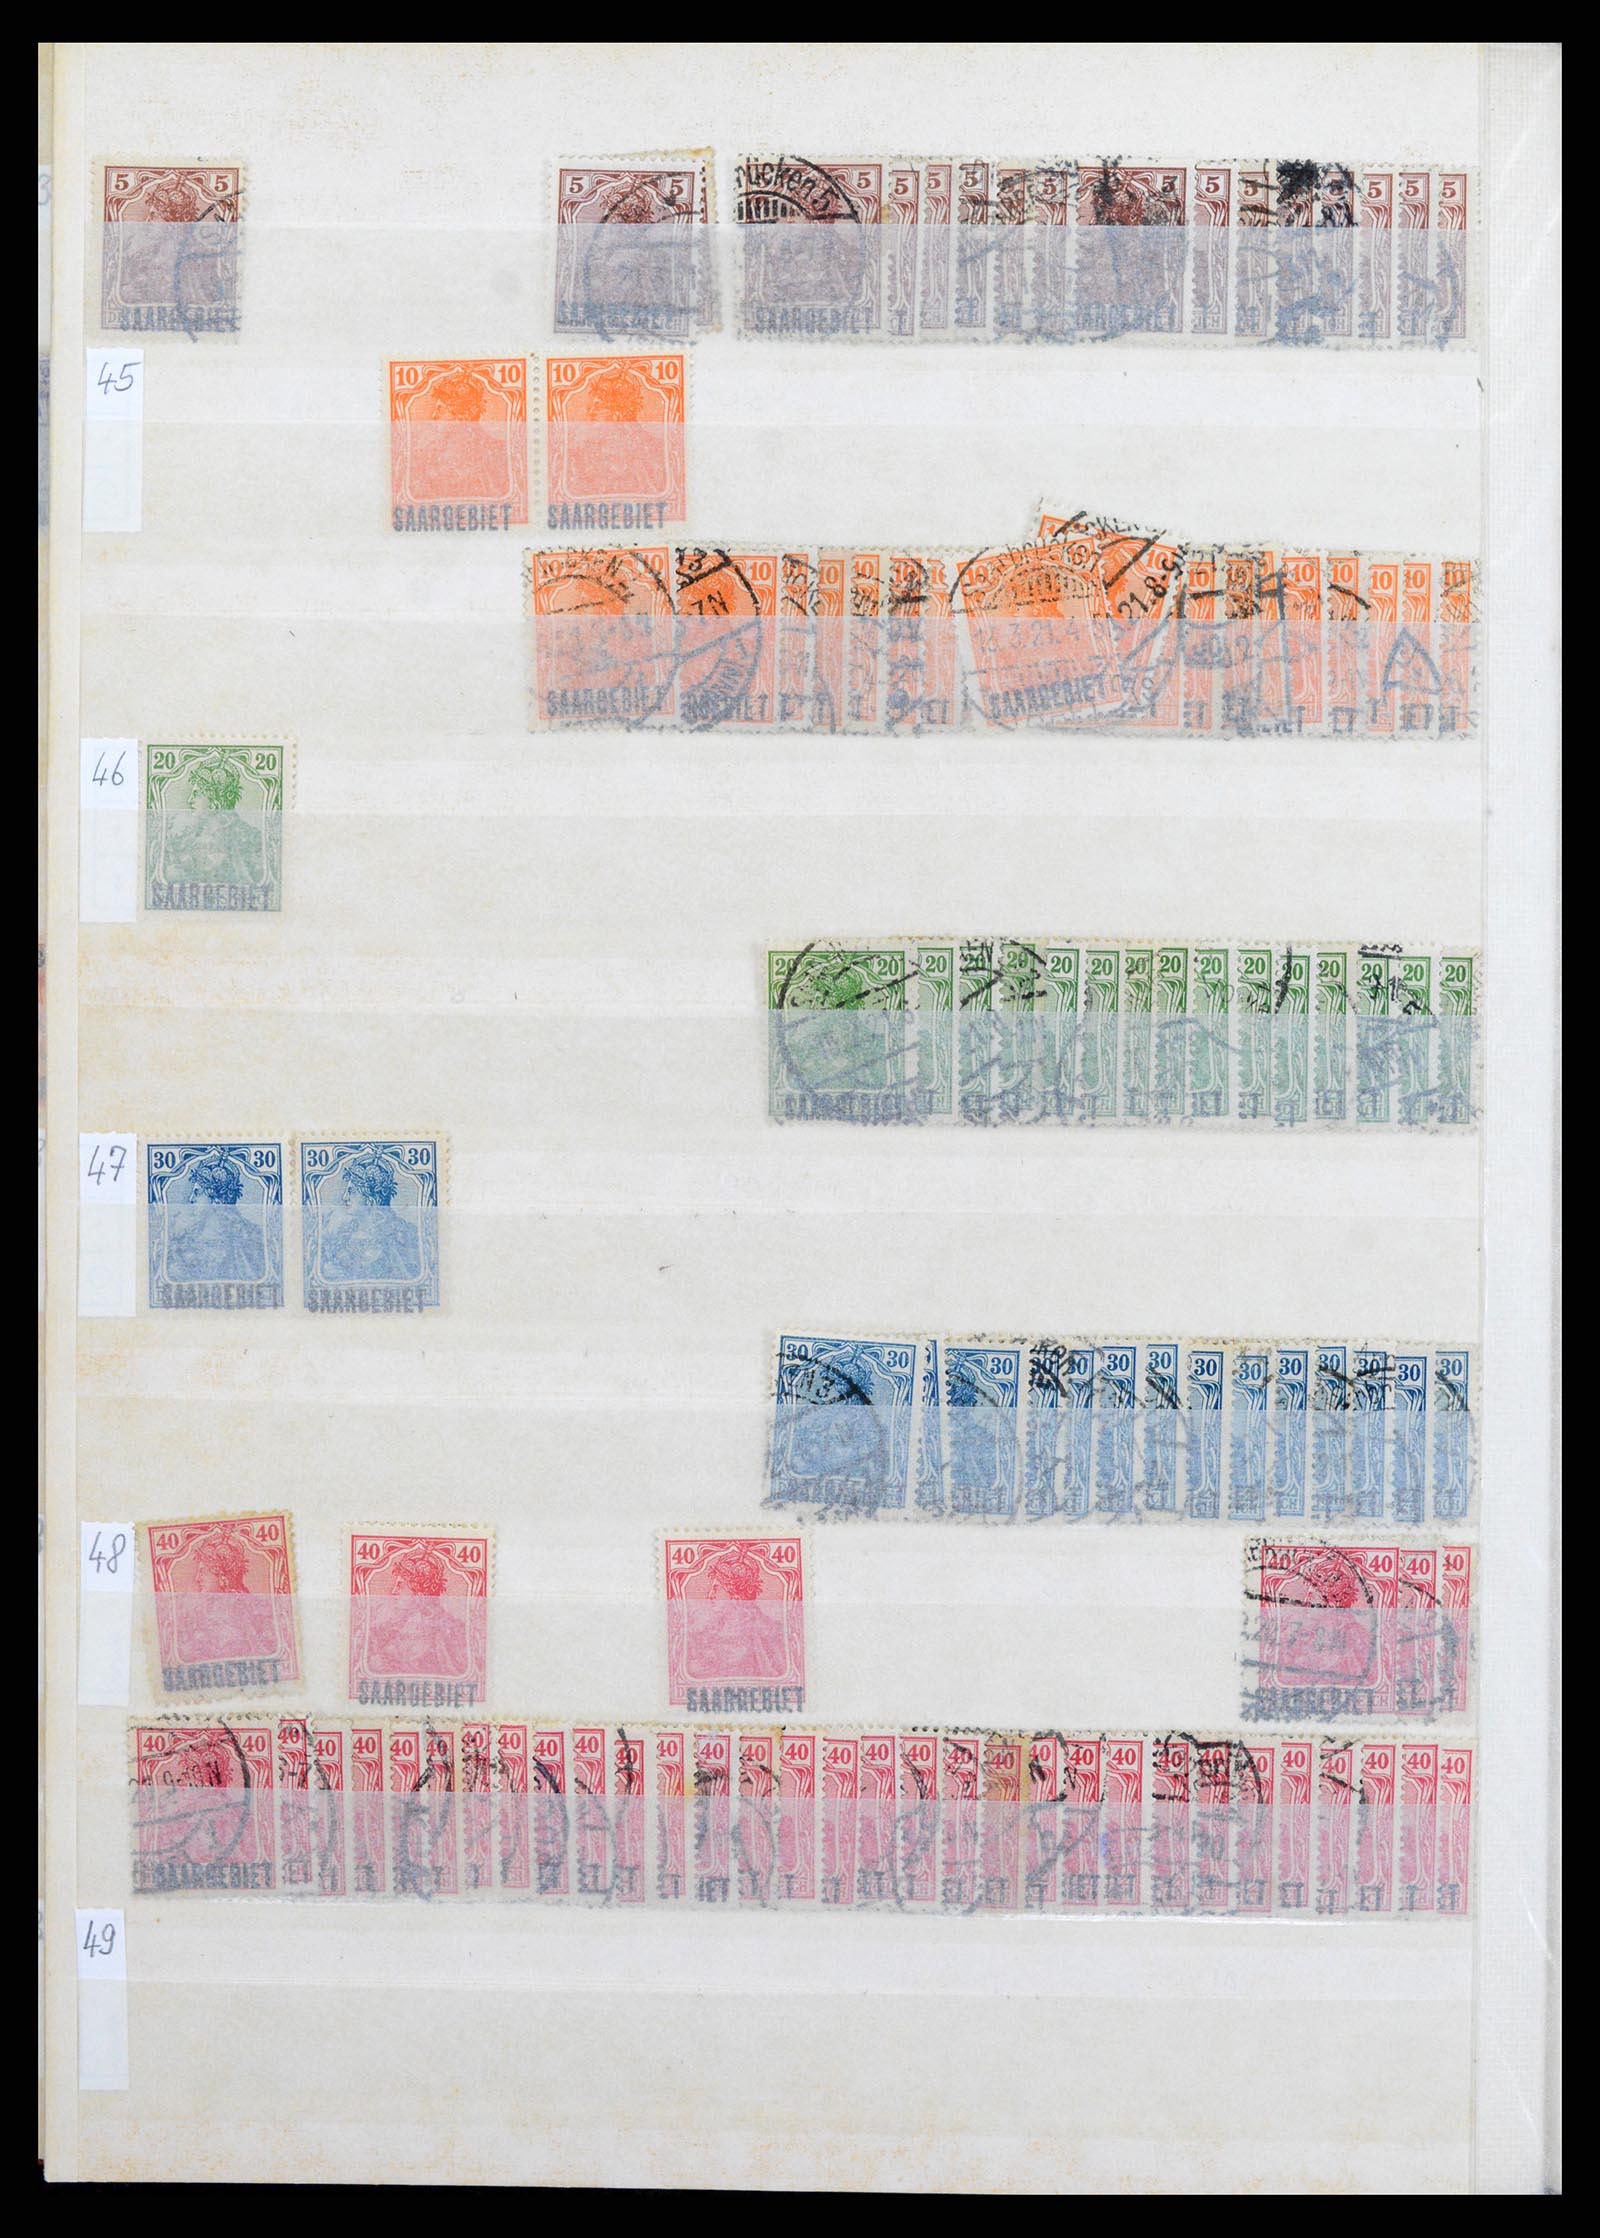 37534 010 - Stamp collection 37534 German territories and occupations 1920-1959.